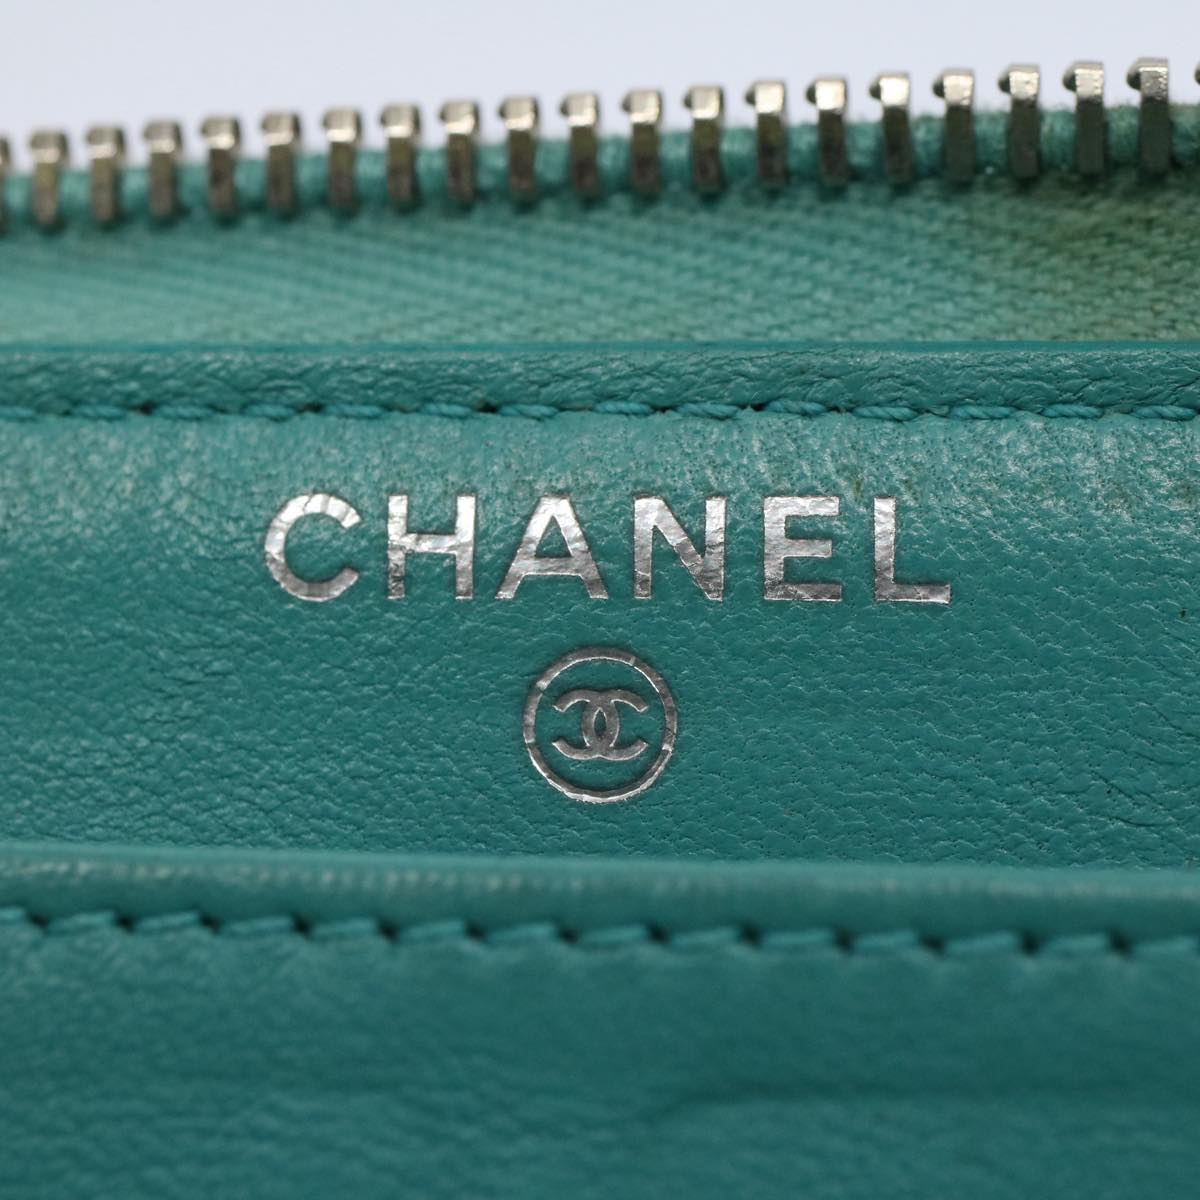 CHANEL Matelasse Wallet Lamb Skin Turquoise Blue CC Auth bs9740